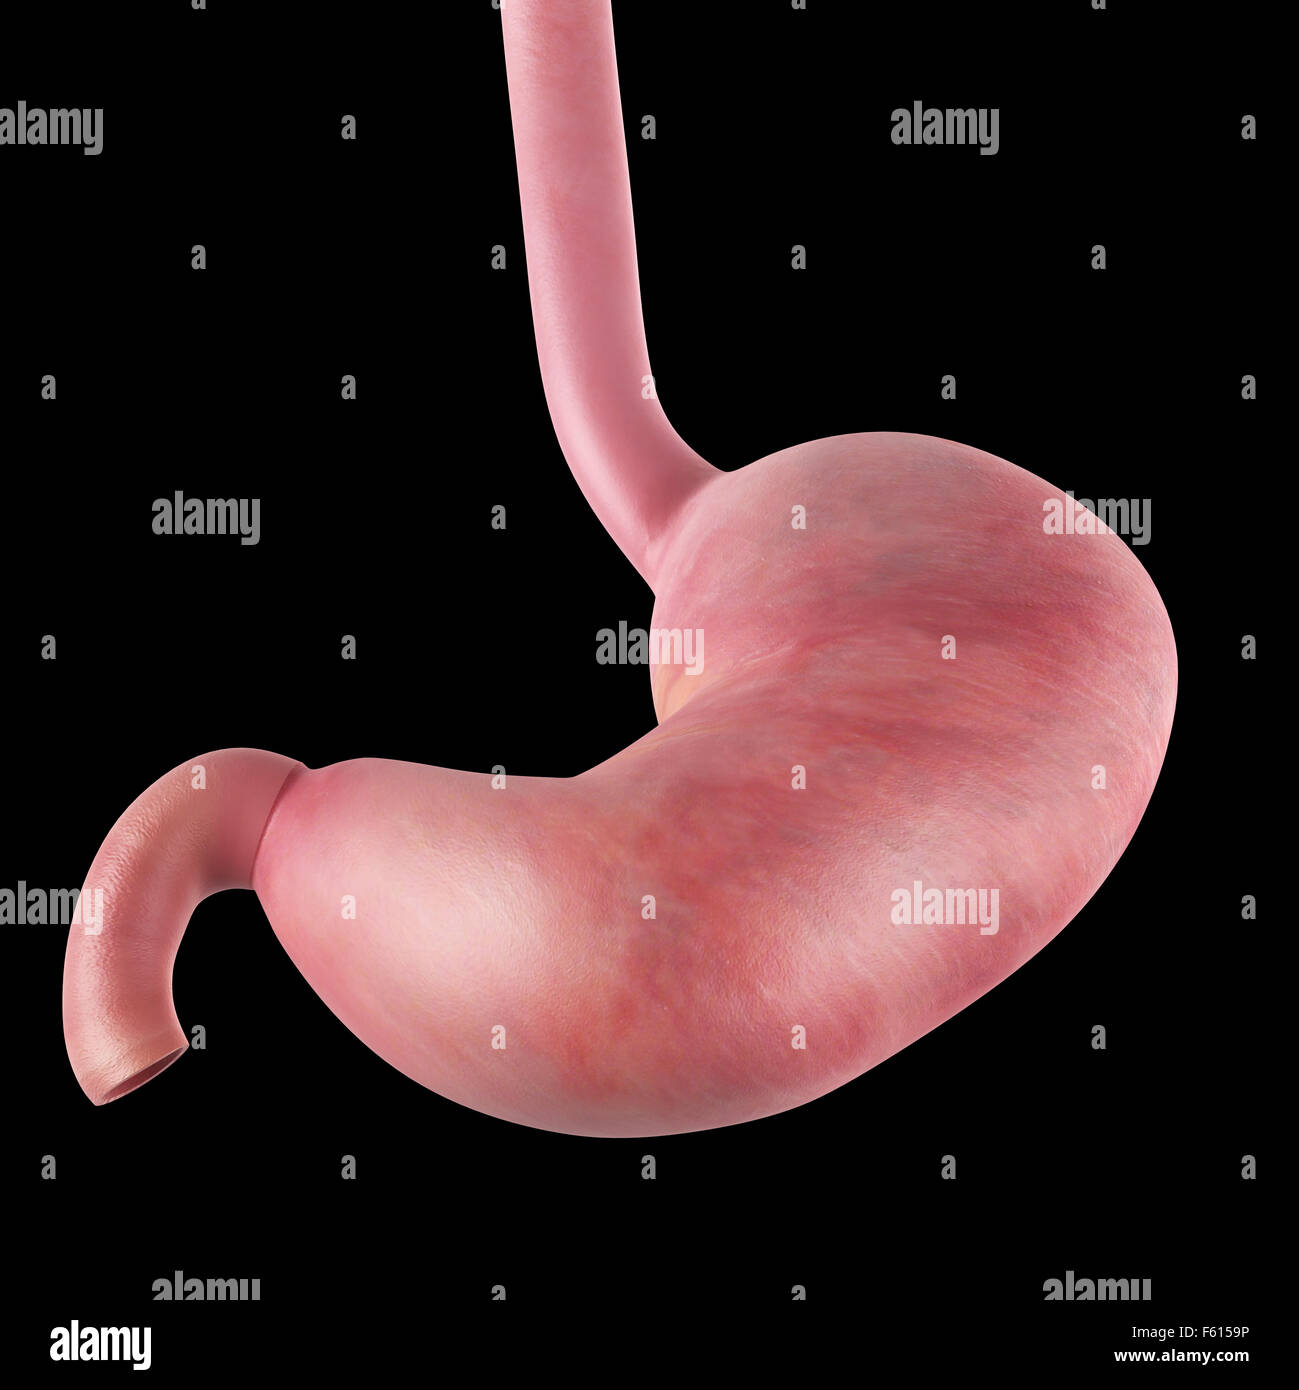 medically accurate illustration of the stomach Stock Photo